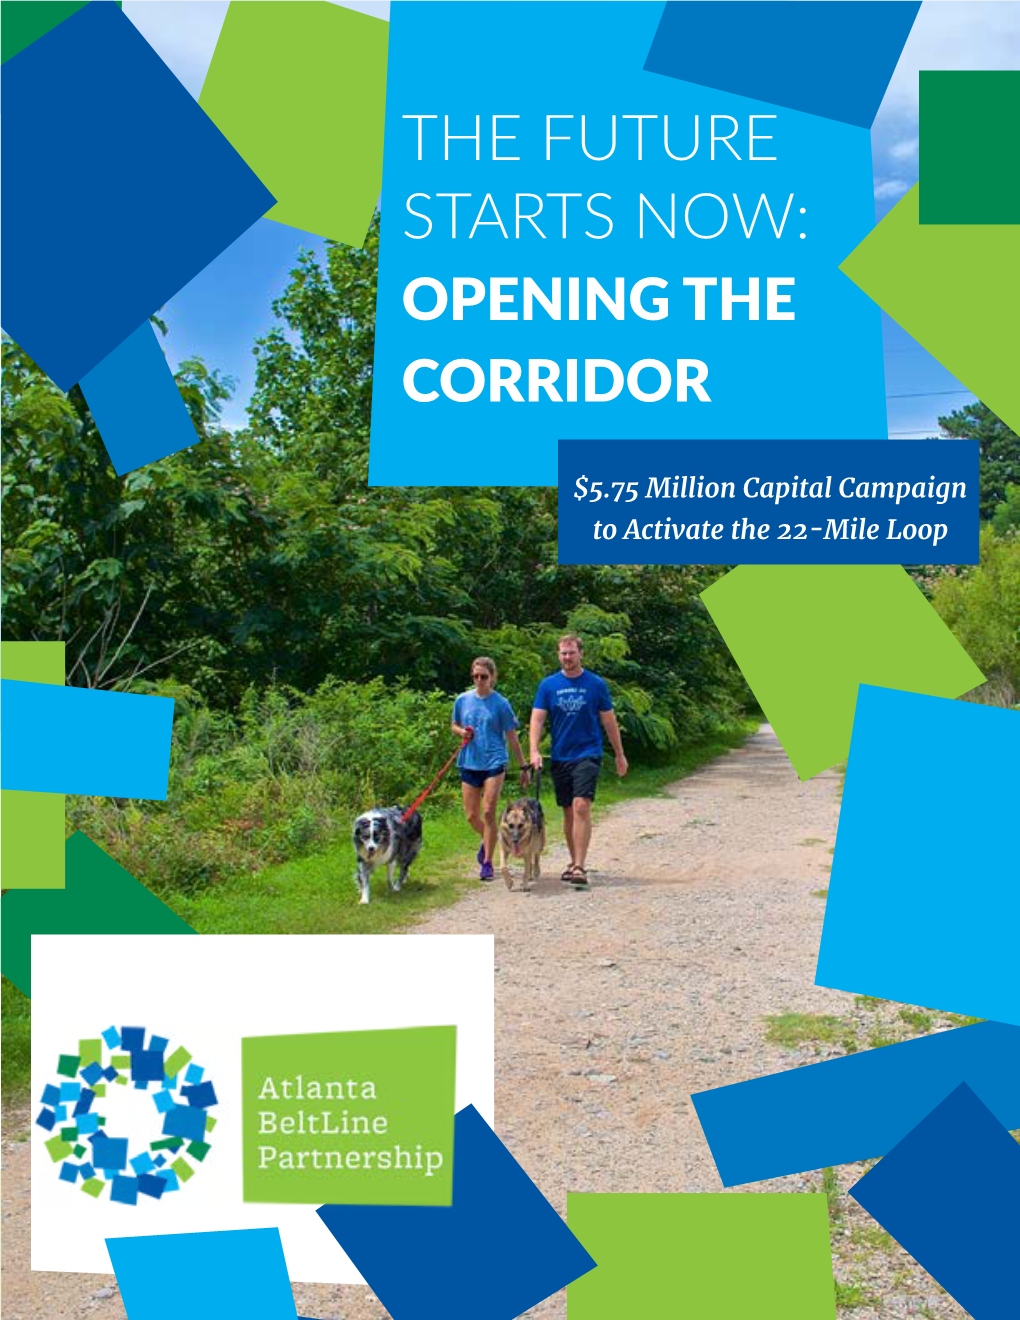 The Future Starts Now: Opening the Corridor